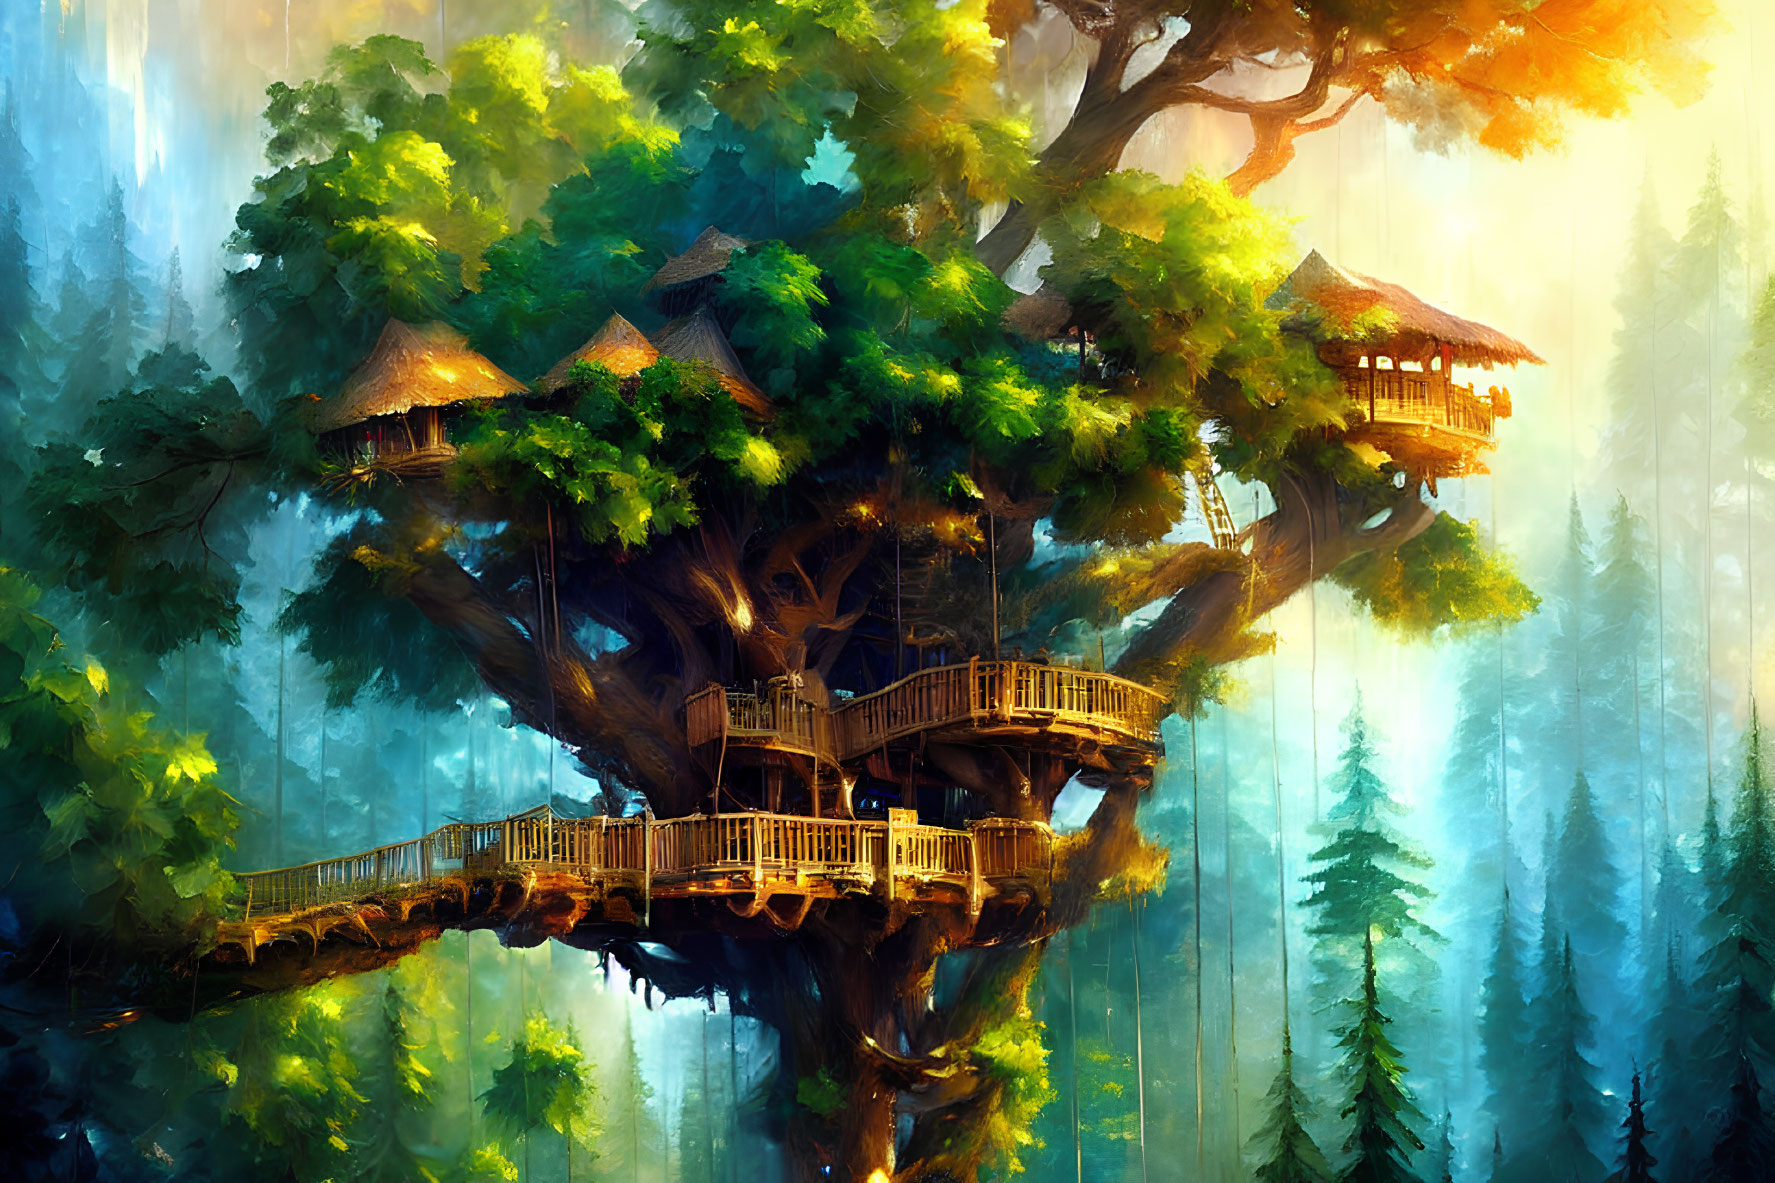 Treehouse with wooden huts and bridges in a mystical forest